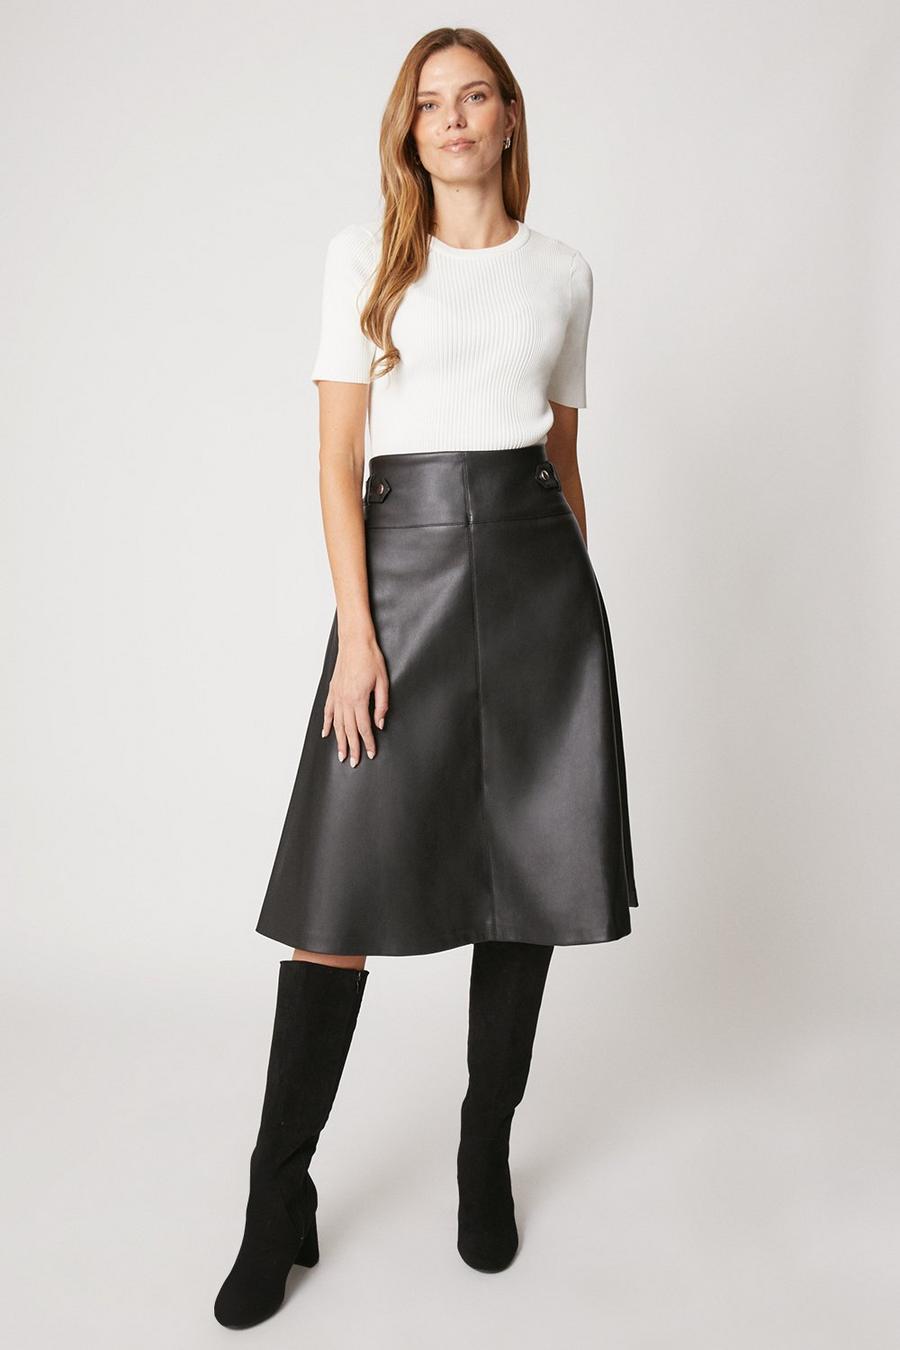 Black Tab Detail Faux Leather A Line Skirt